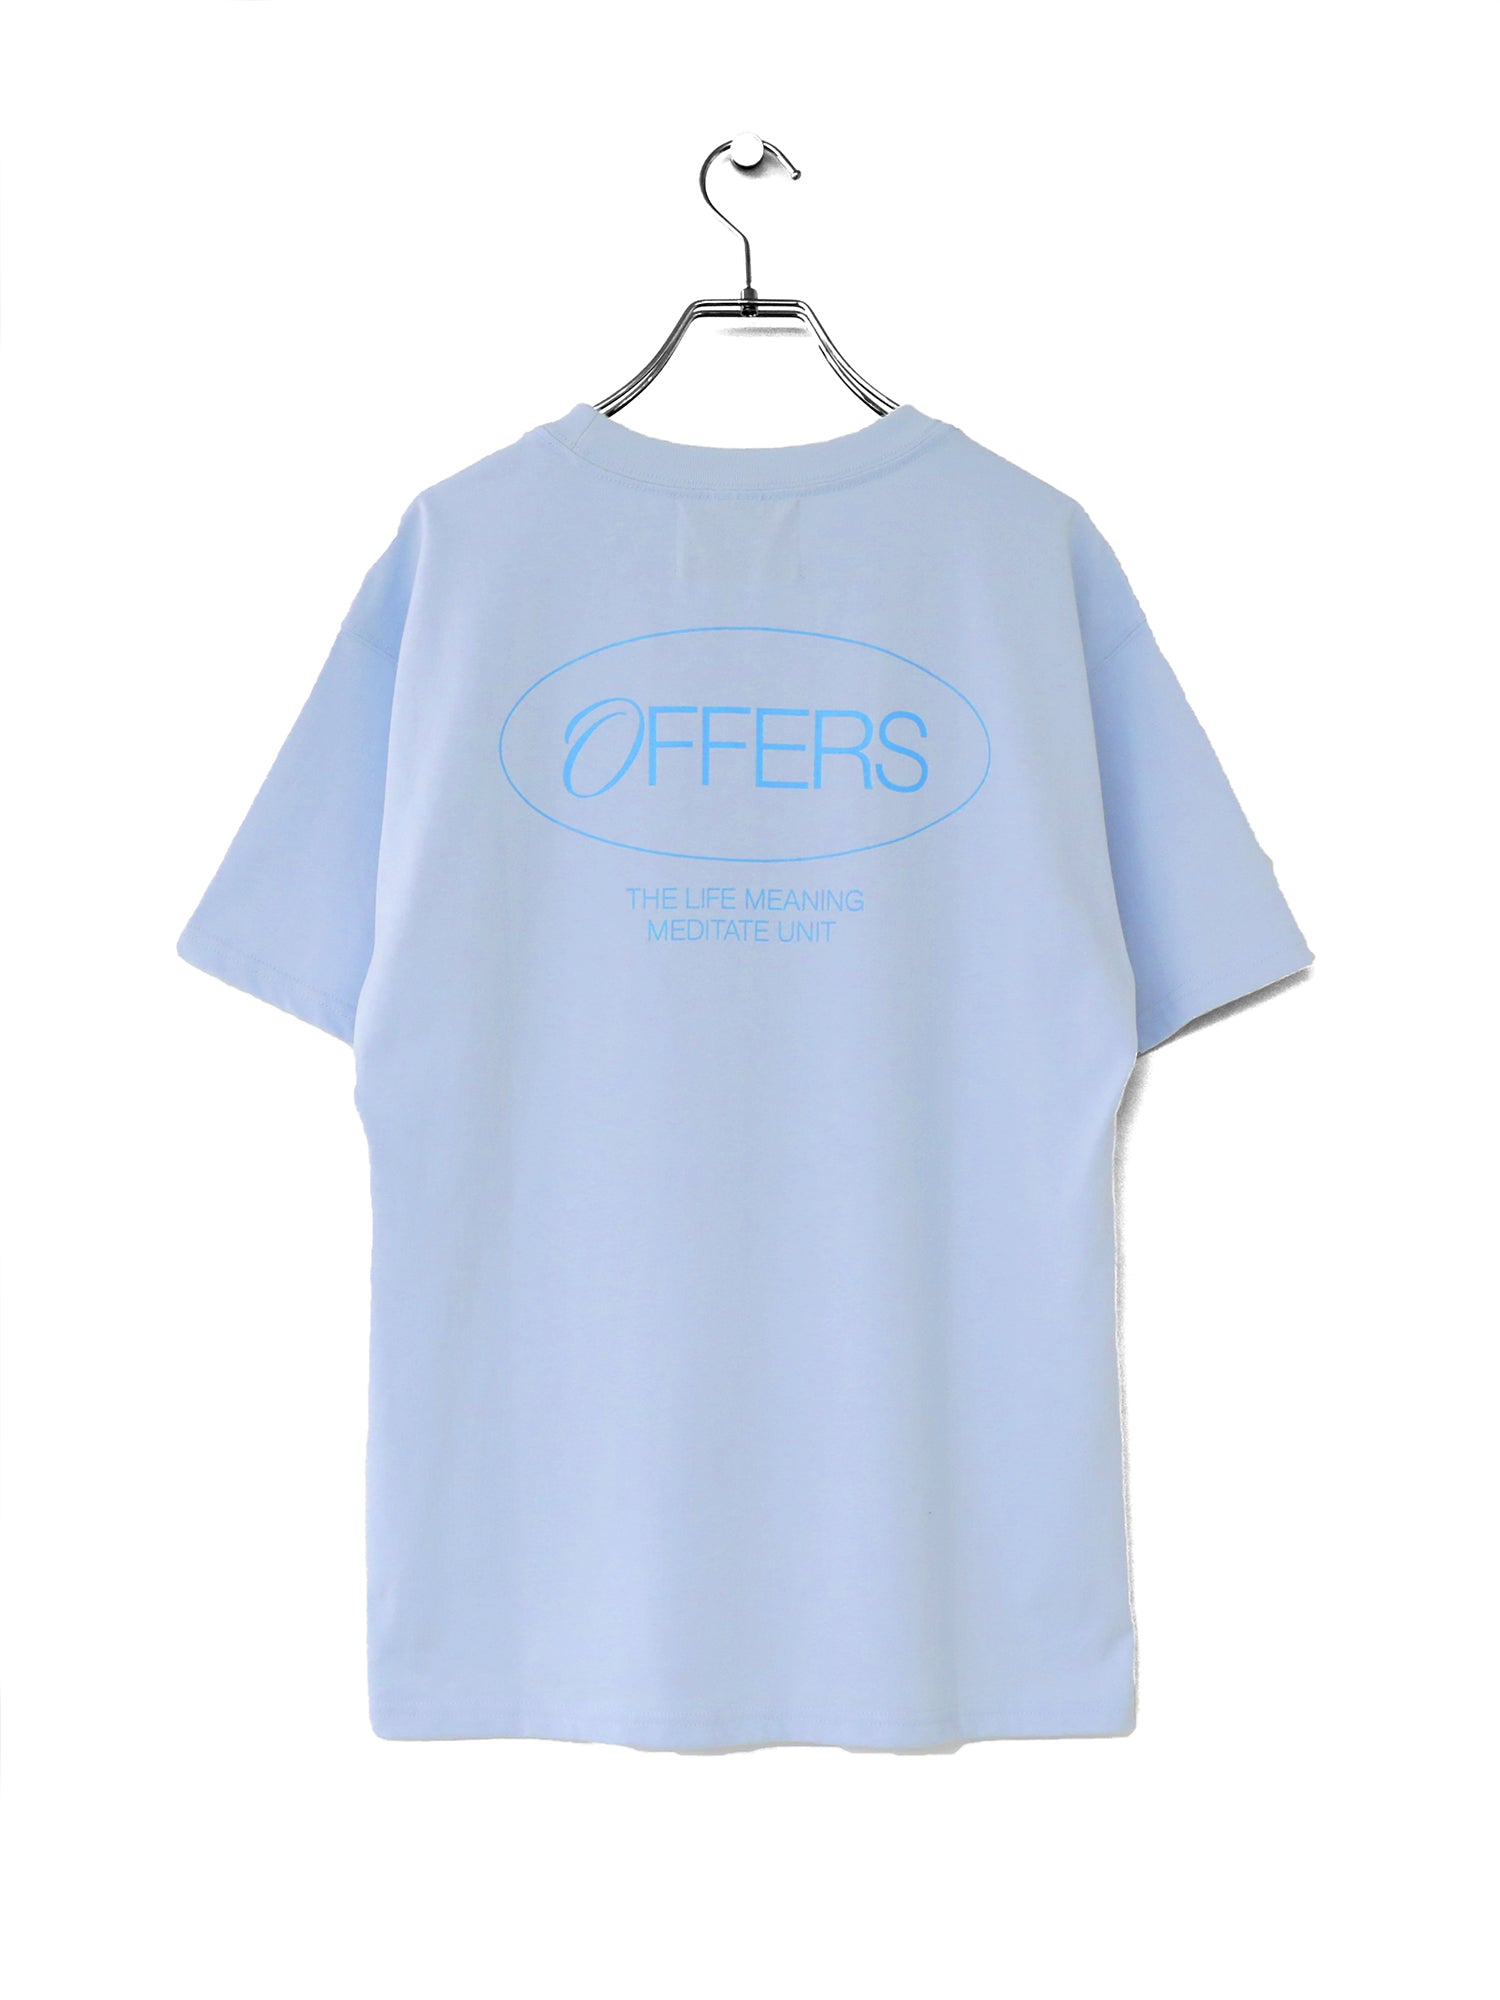 the best offers "LIFE MEANING" 8.1oz TEE